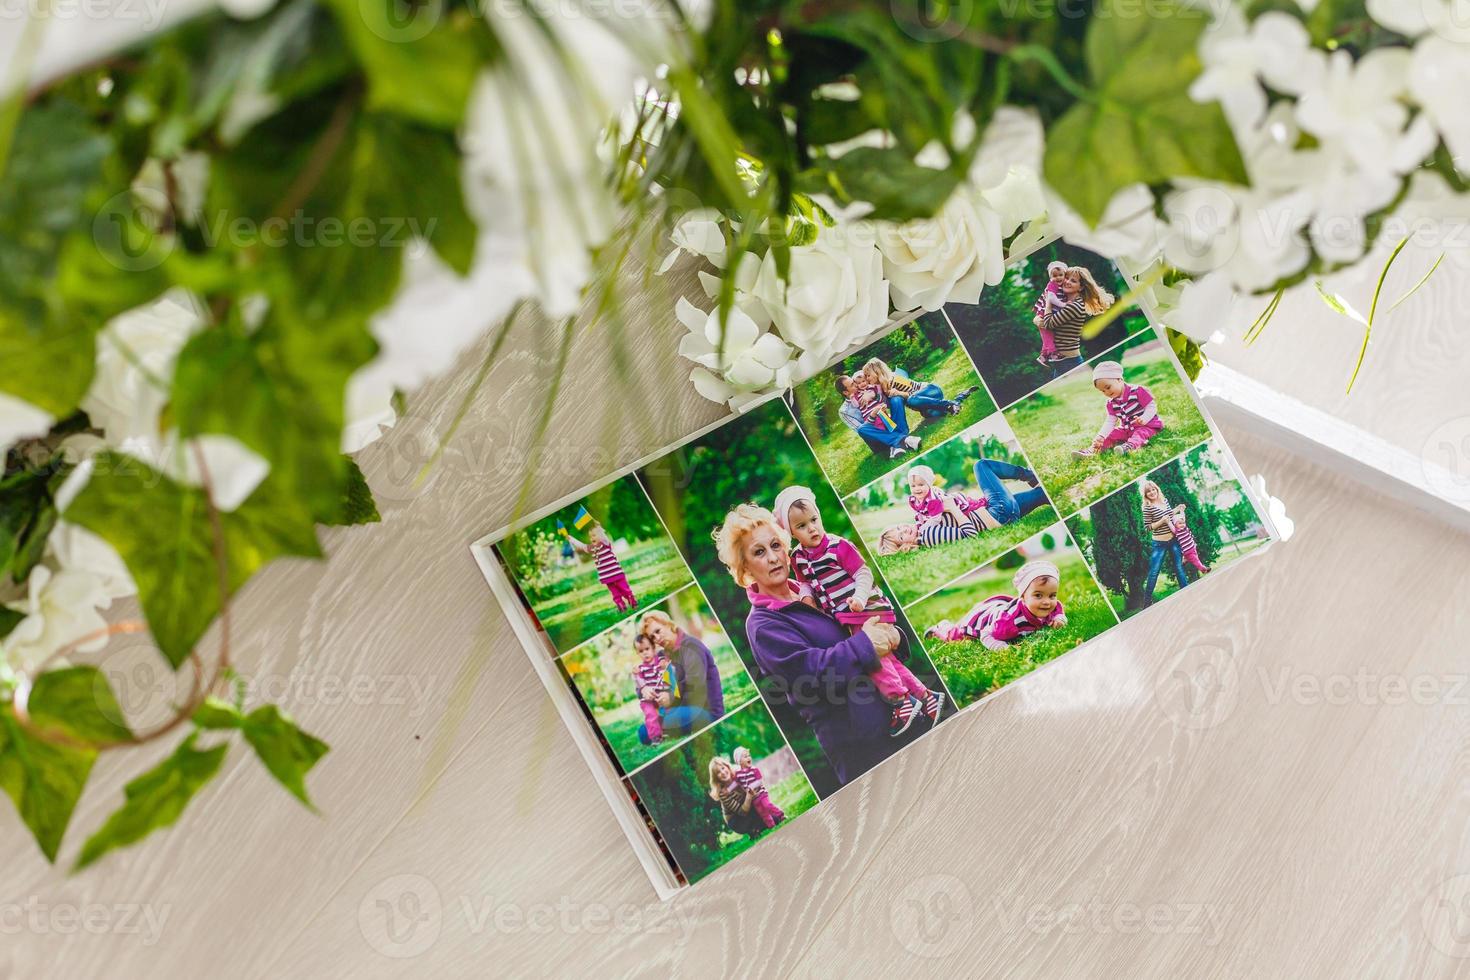 photo album on the table with rose petals. Wedding decorations. Festive event